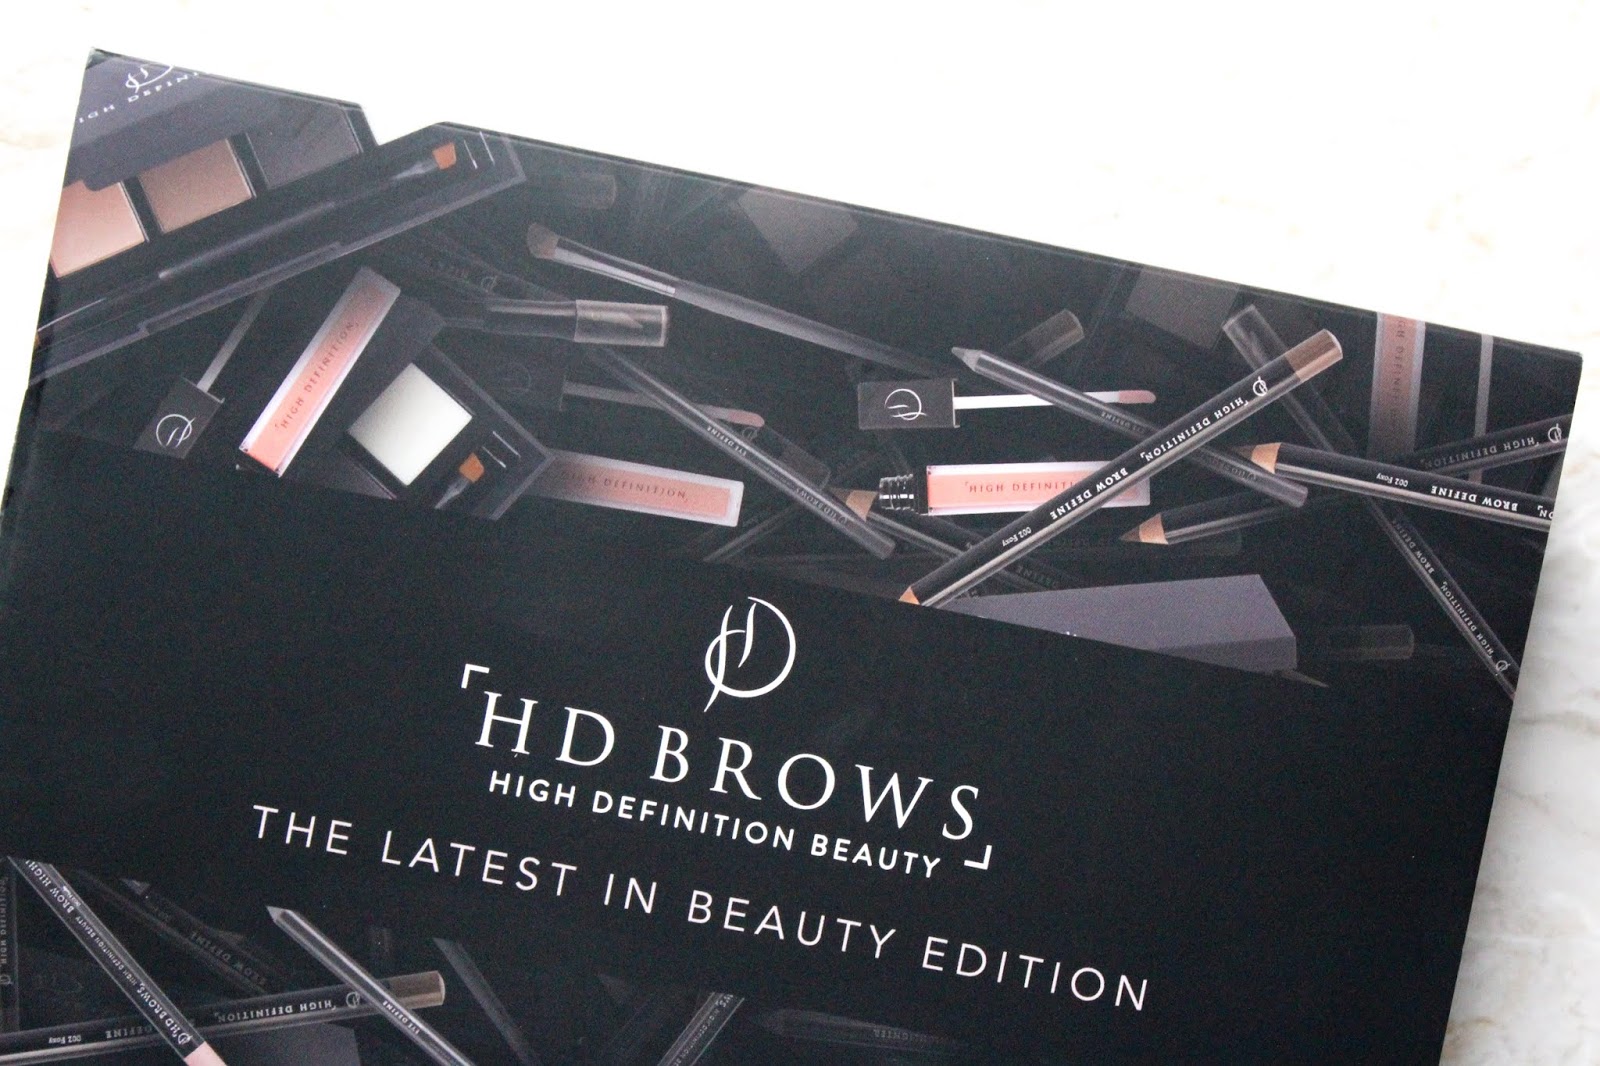 Latest in Beauty x HD Brows 